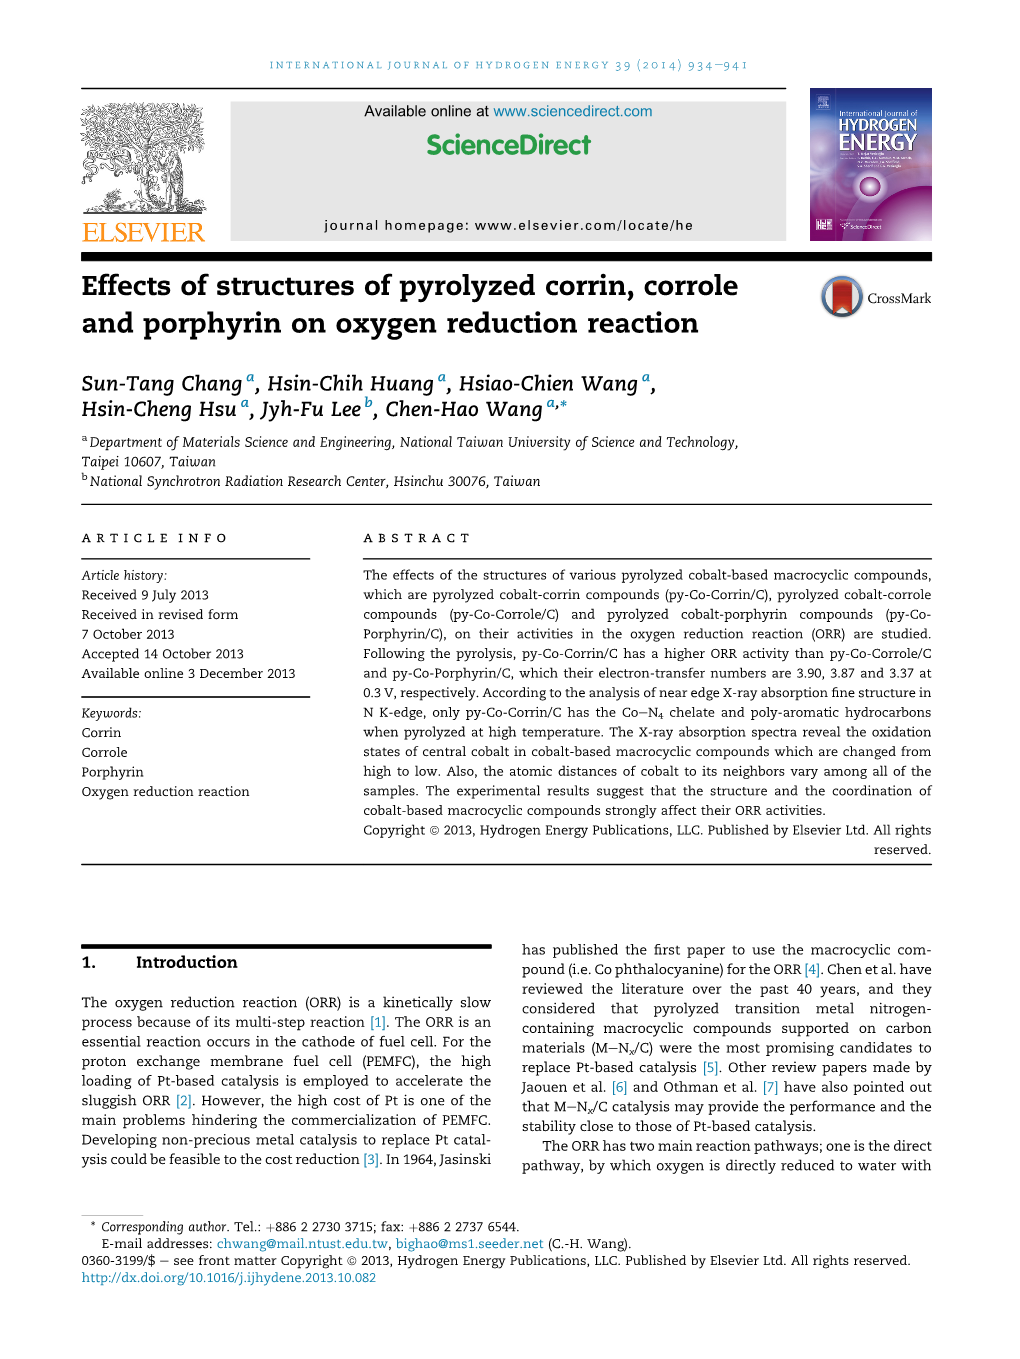 Effects of Structures of Pyrolyzed Corrin, Corrole and Porphyrin on Oxygen Reduction Reaction